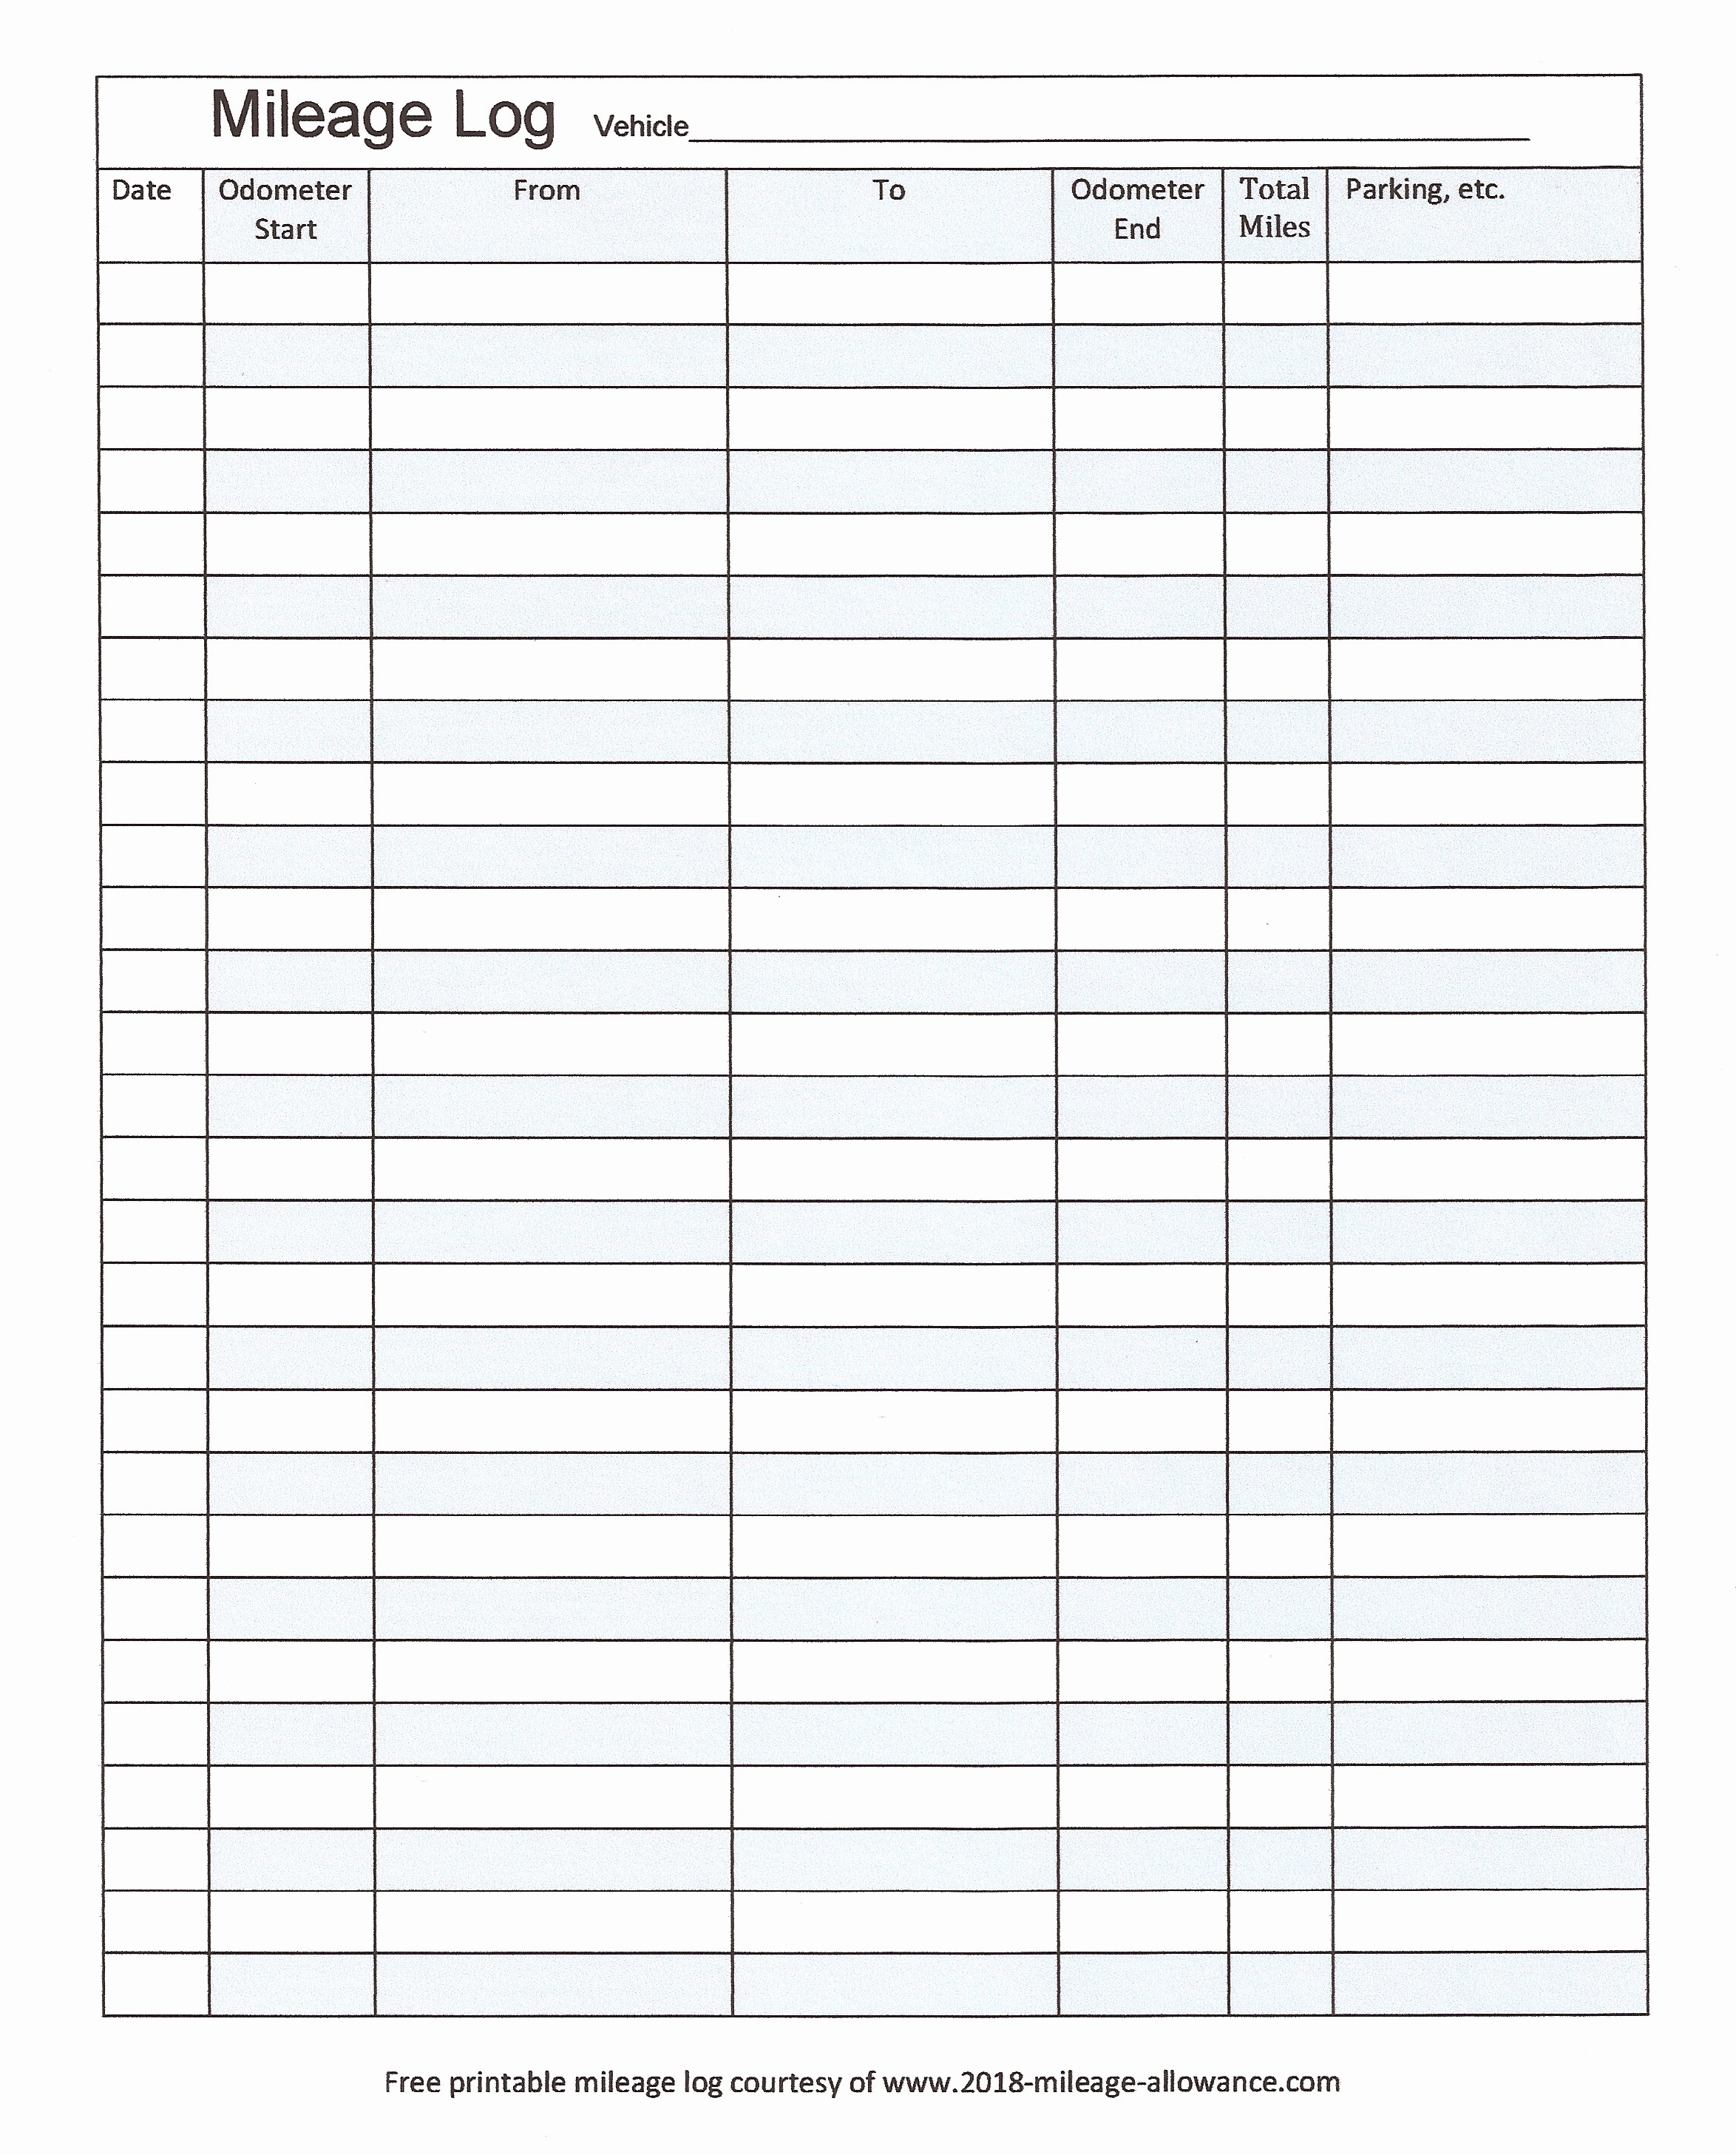 50 New Mileage Log Template For Self Employed DOCUMENTS IDEAS